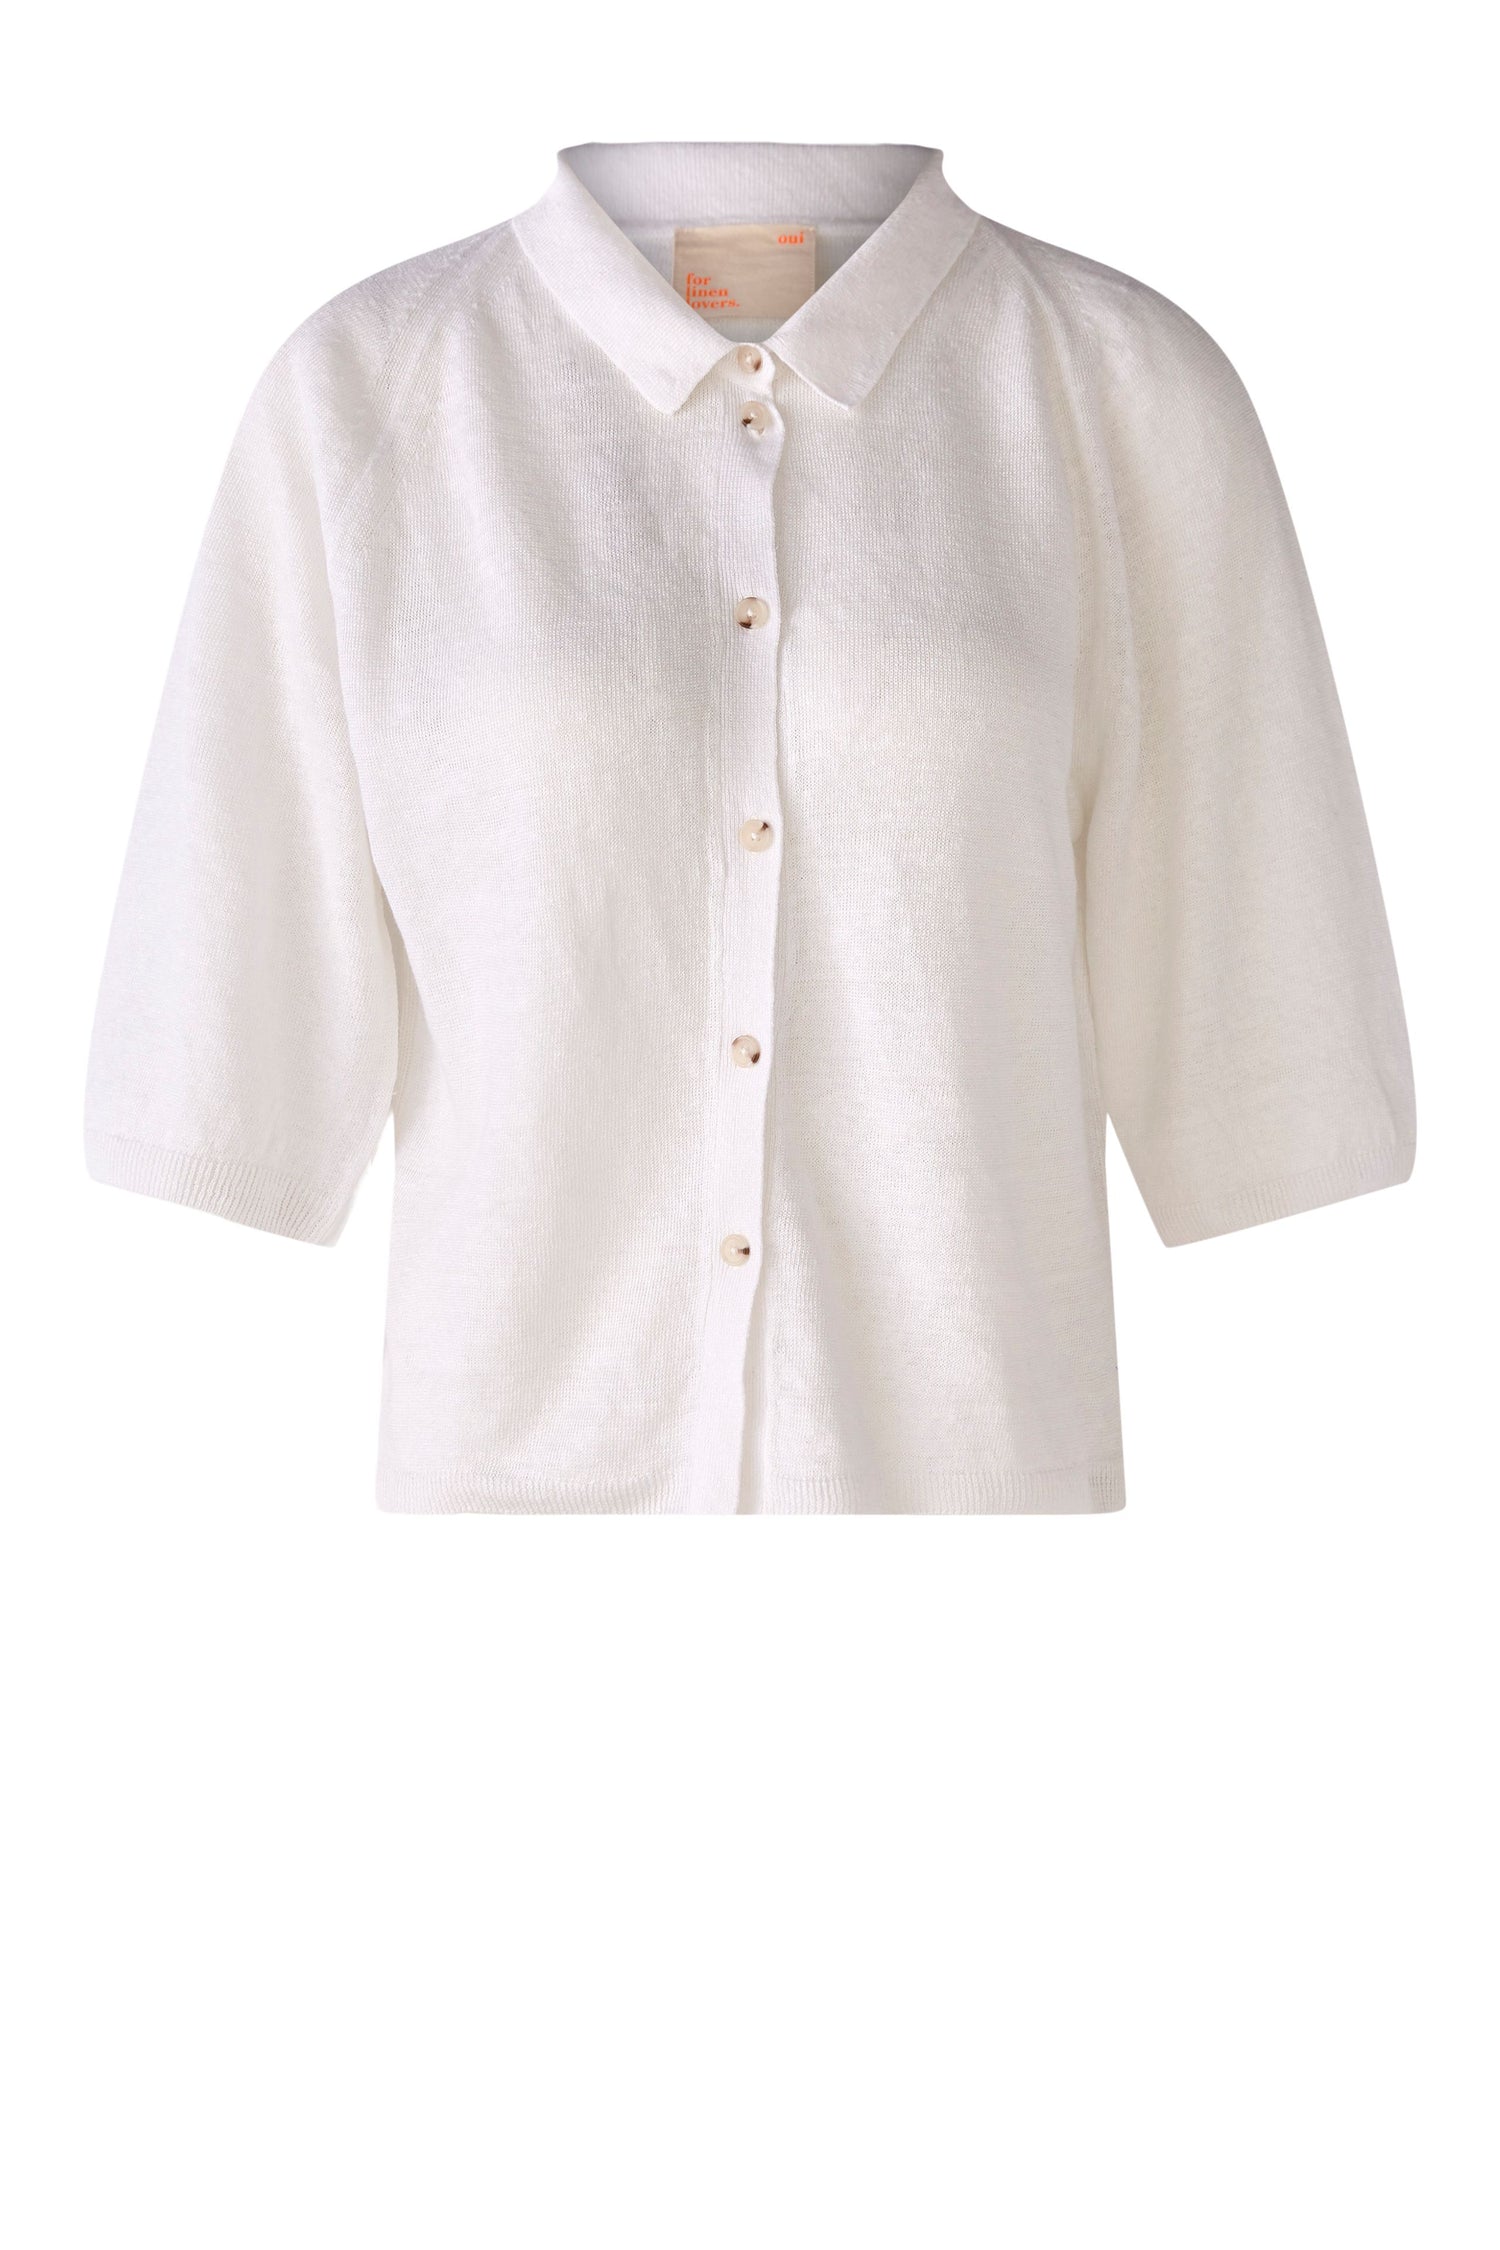 Oui White Linen  Top and Jacket